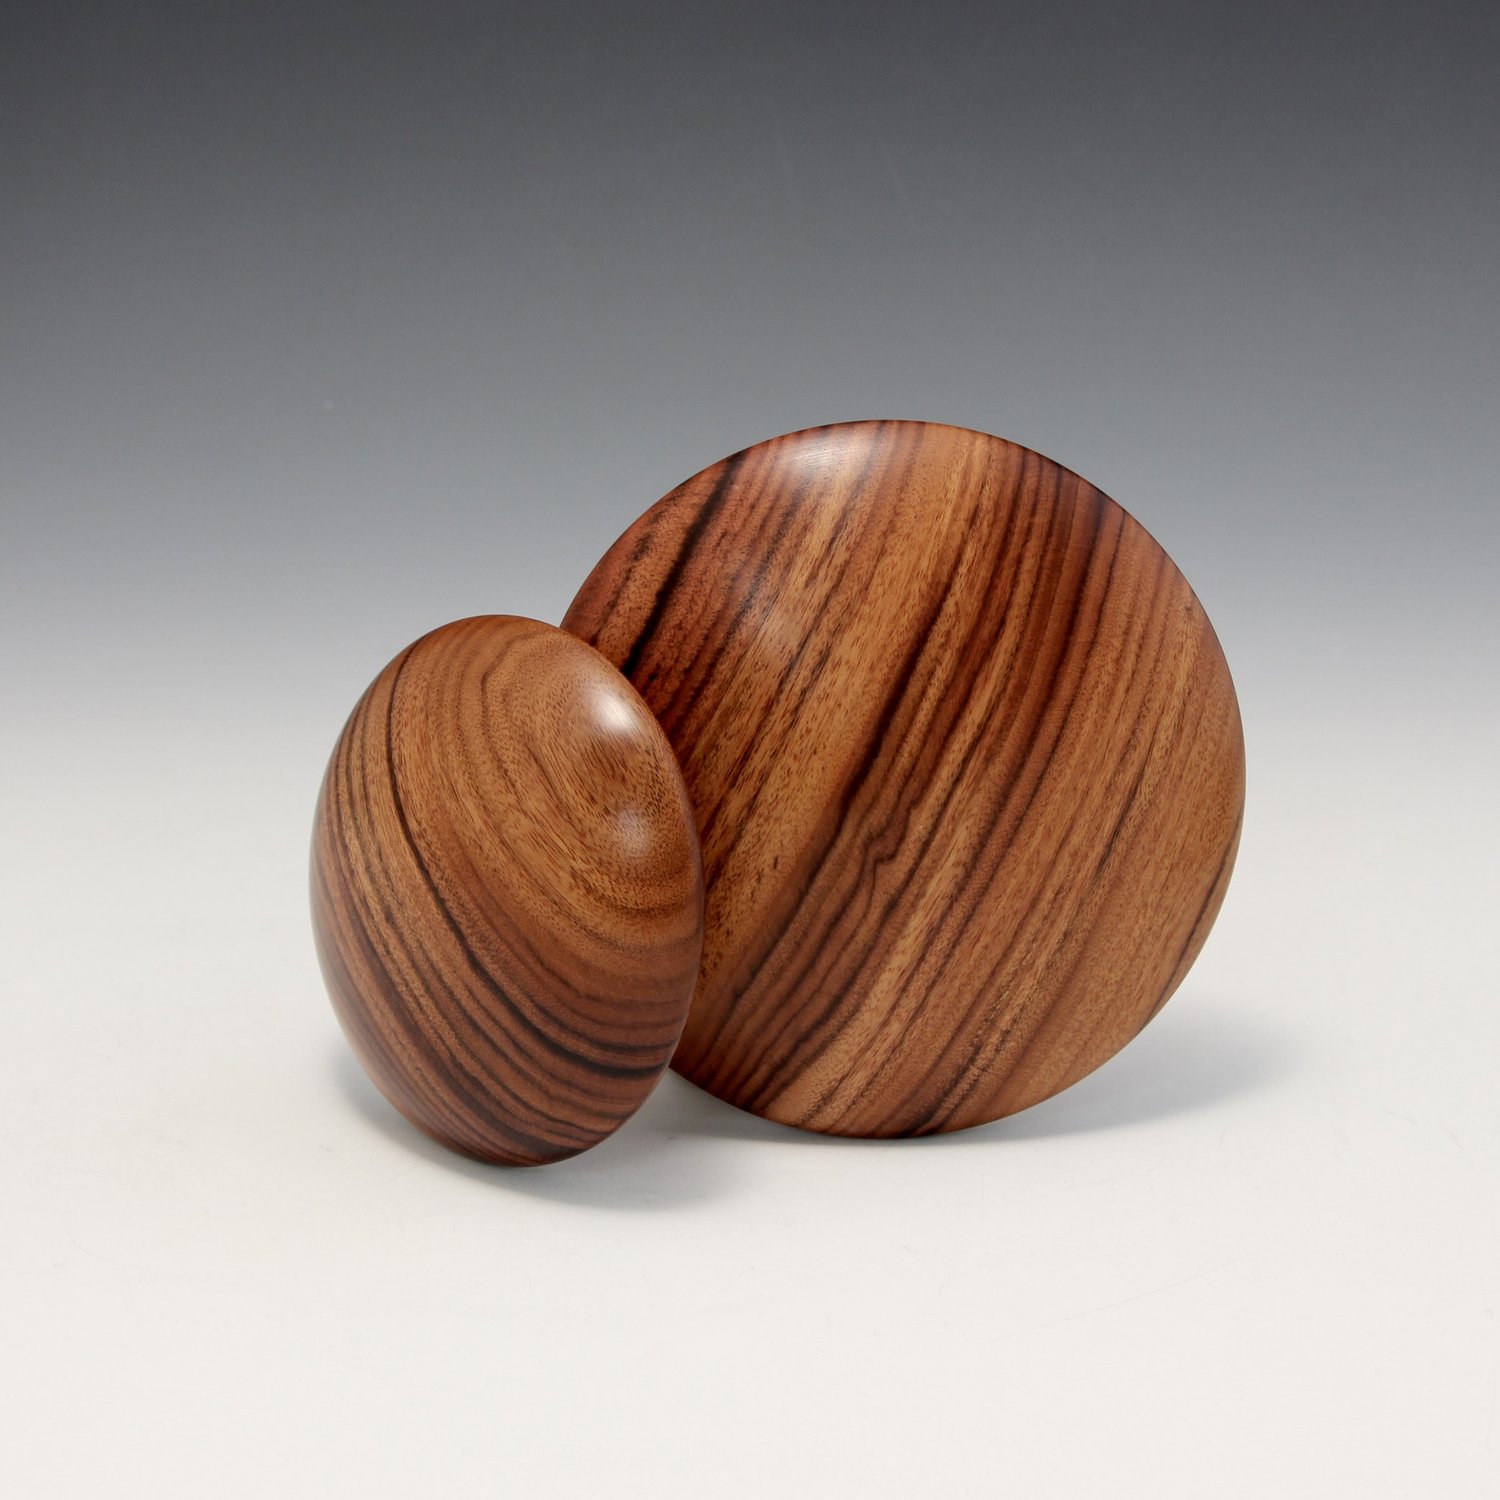 A 3 Mopane Wooden Round Rib for Throwing Perfect Bowls and Mugs